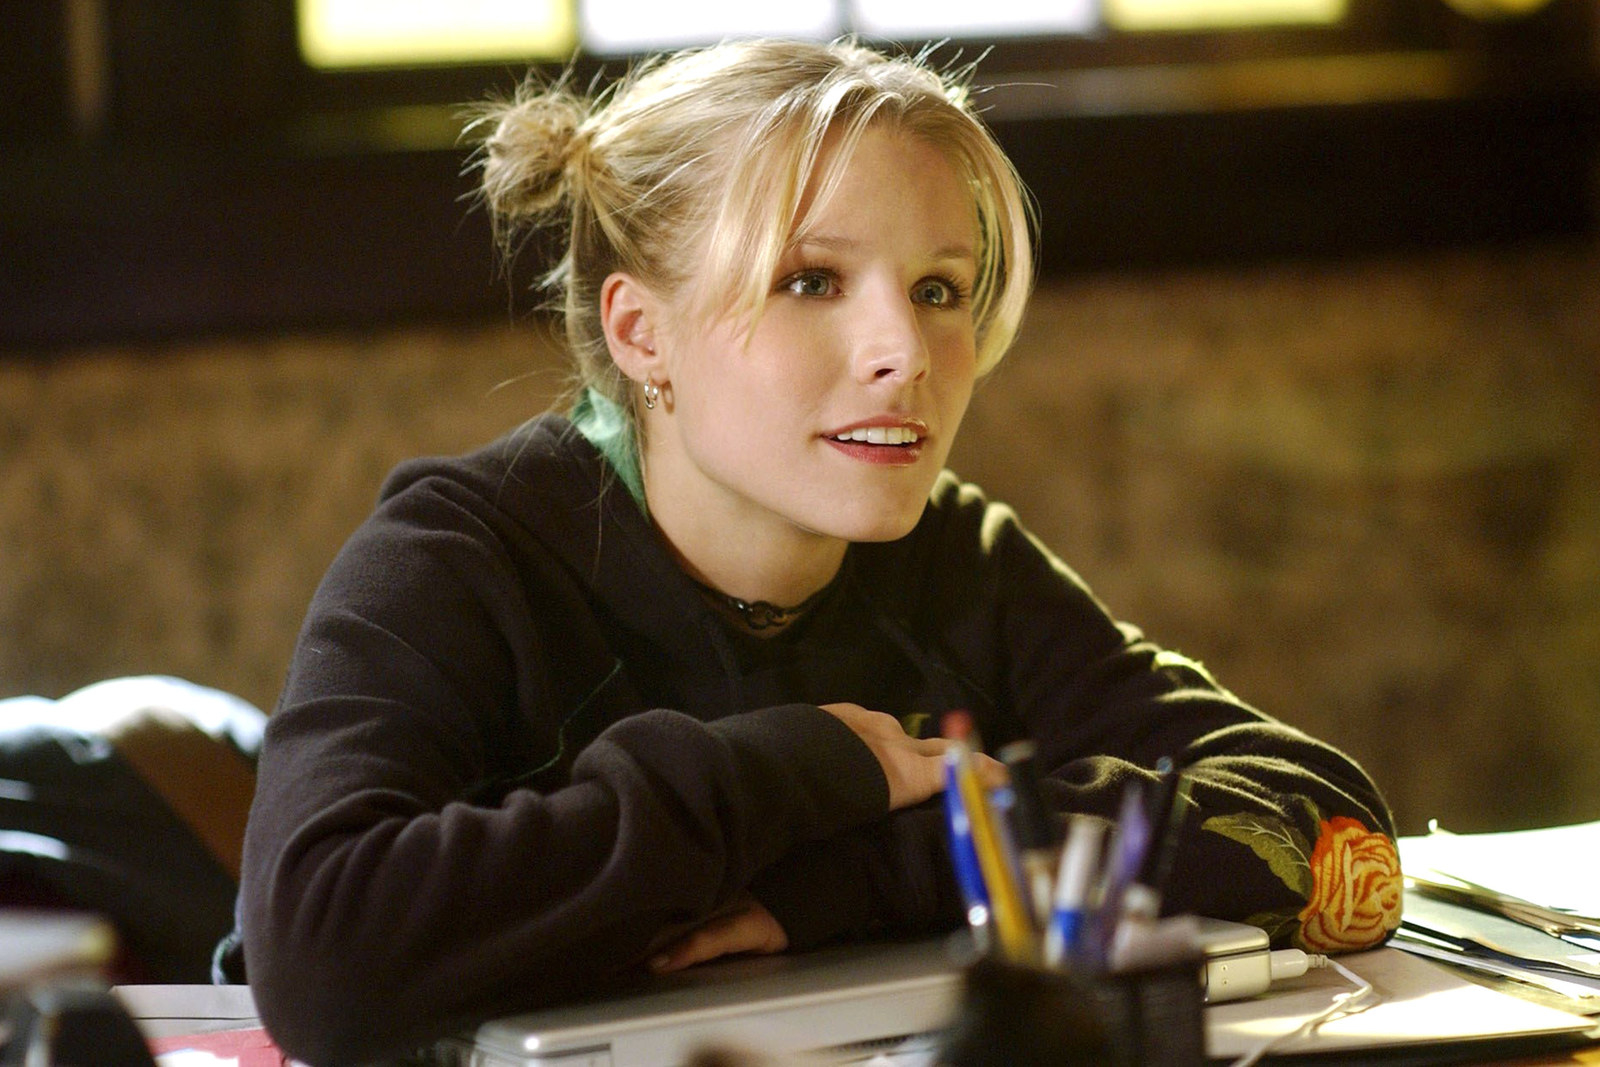 Kristen Bell as Veronica with her arms leaning on a desk